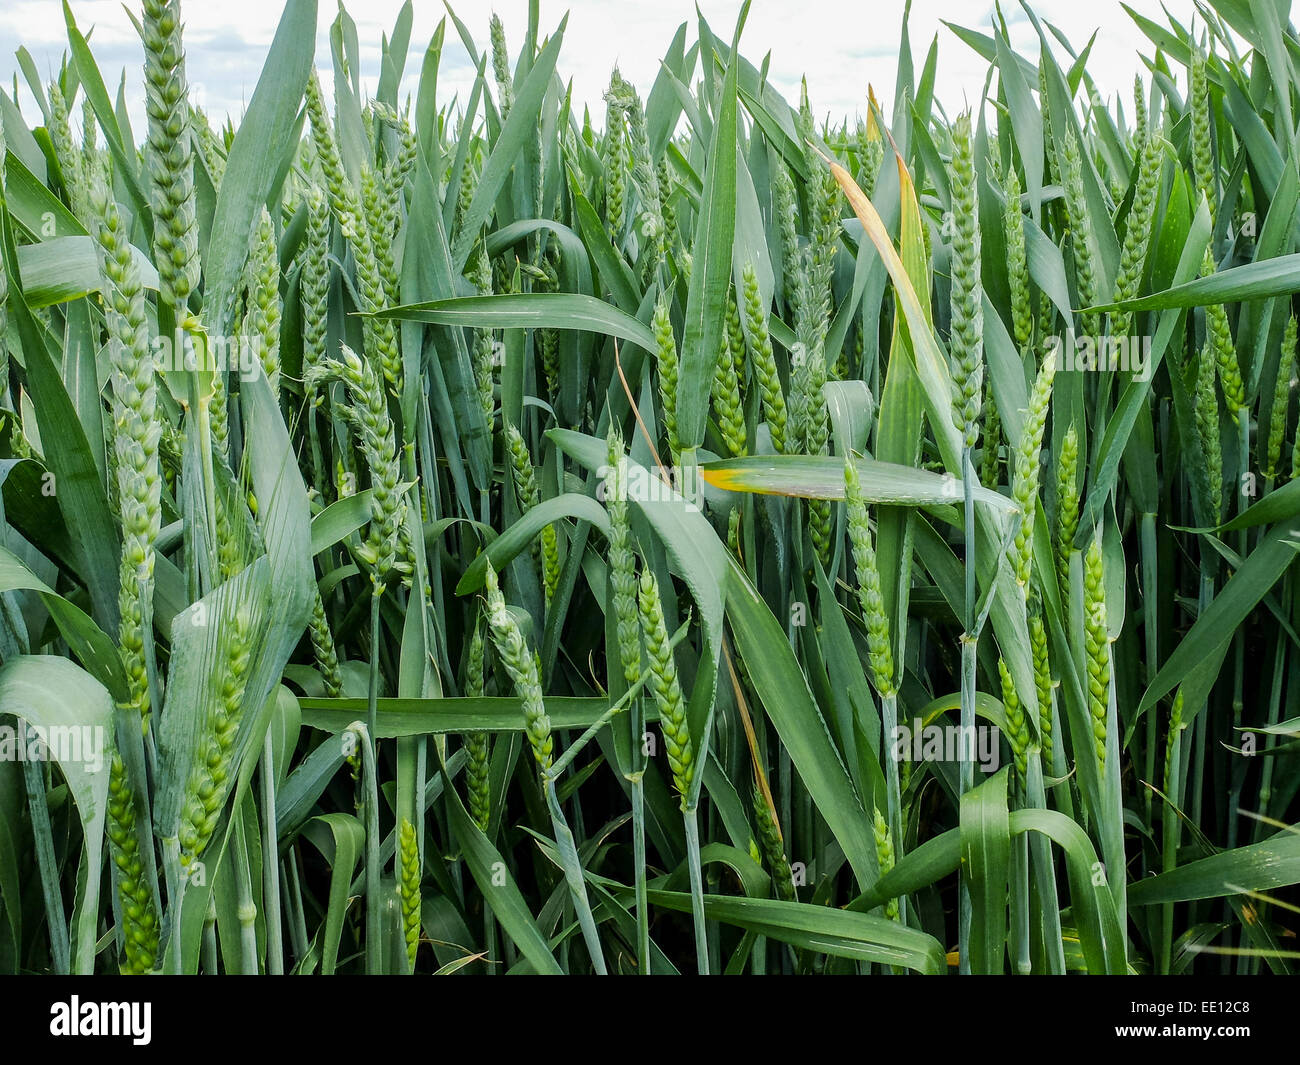 Some ears of wheat in the early stage of their growth, with long green ...